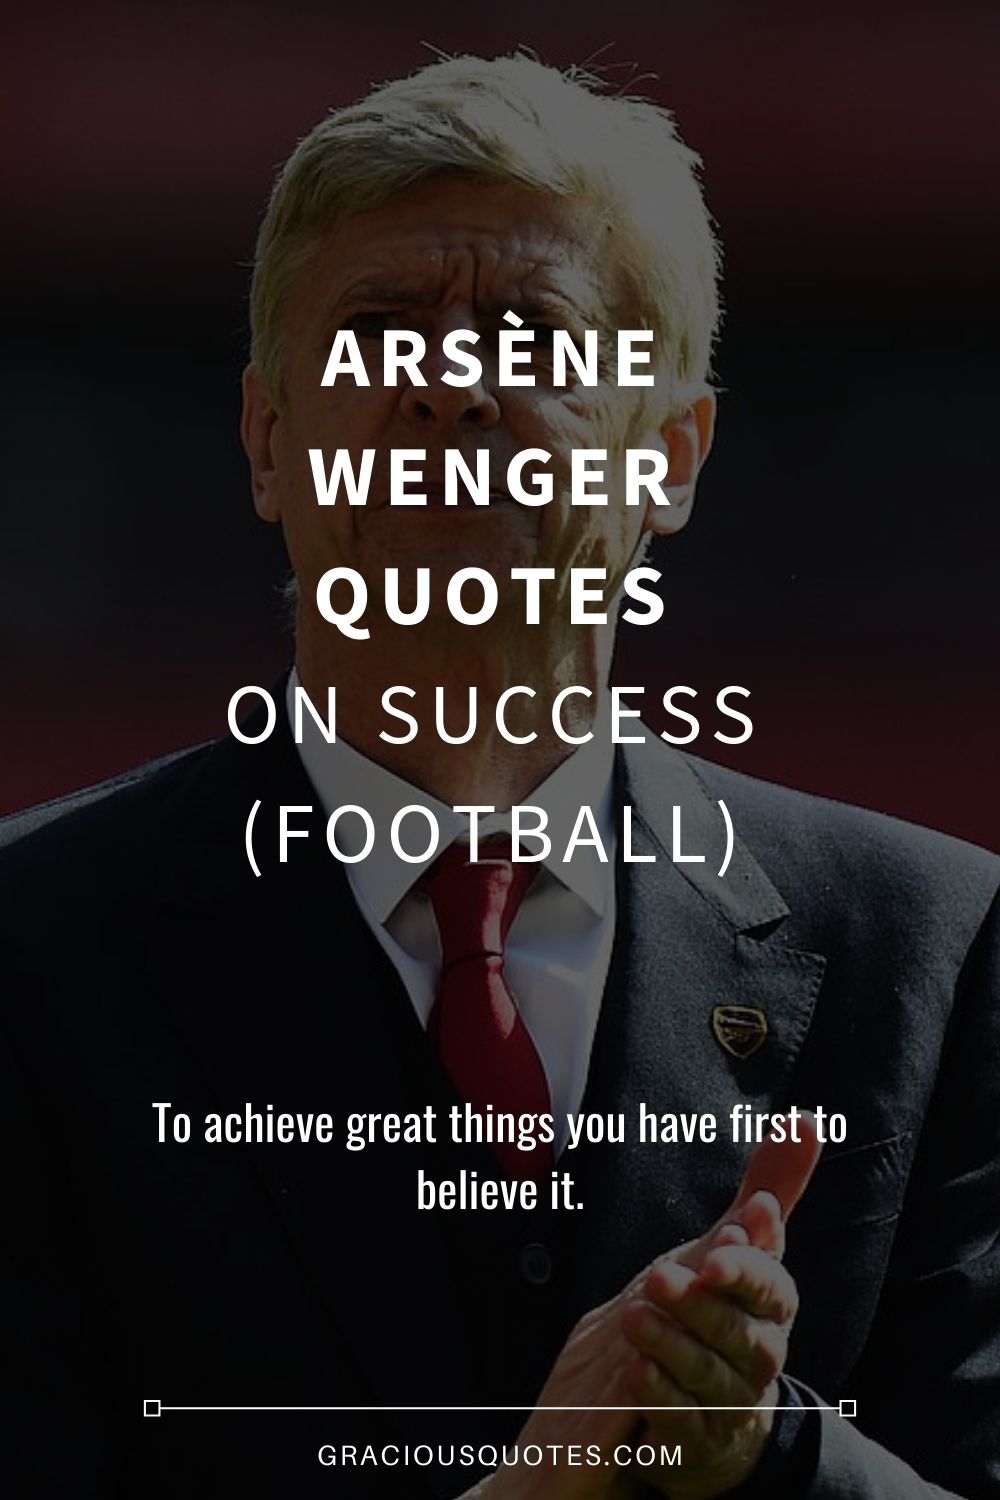 Arsène Wenger Quotes on Success (FOOTBALL) - Gracious Quotes